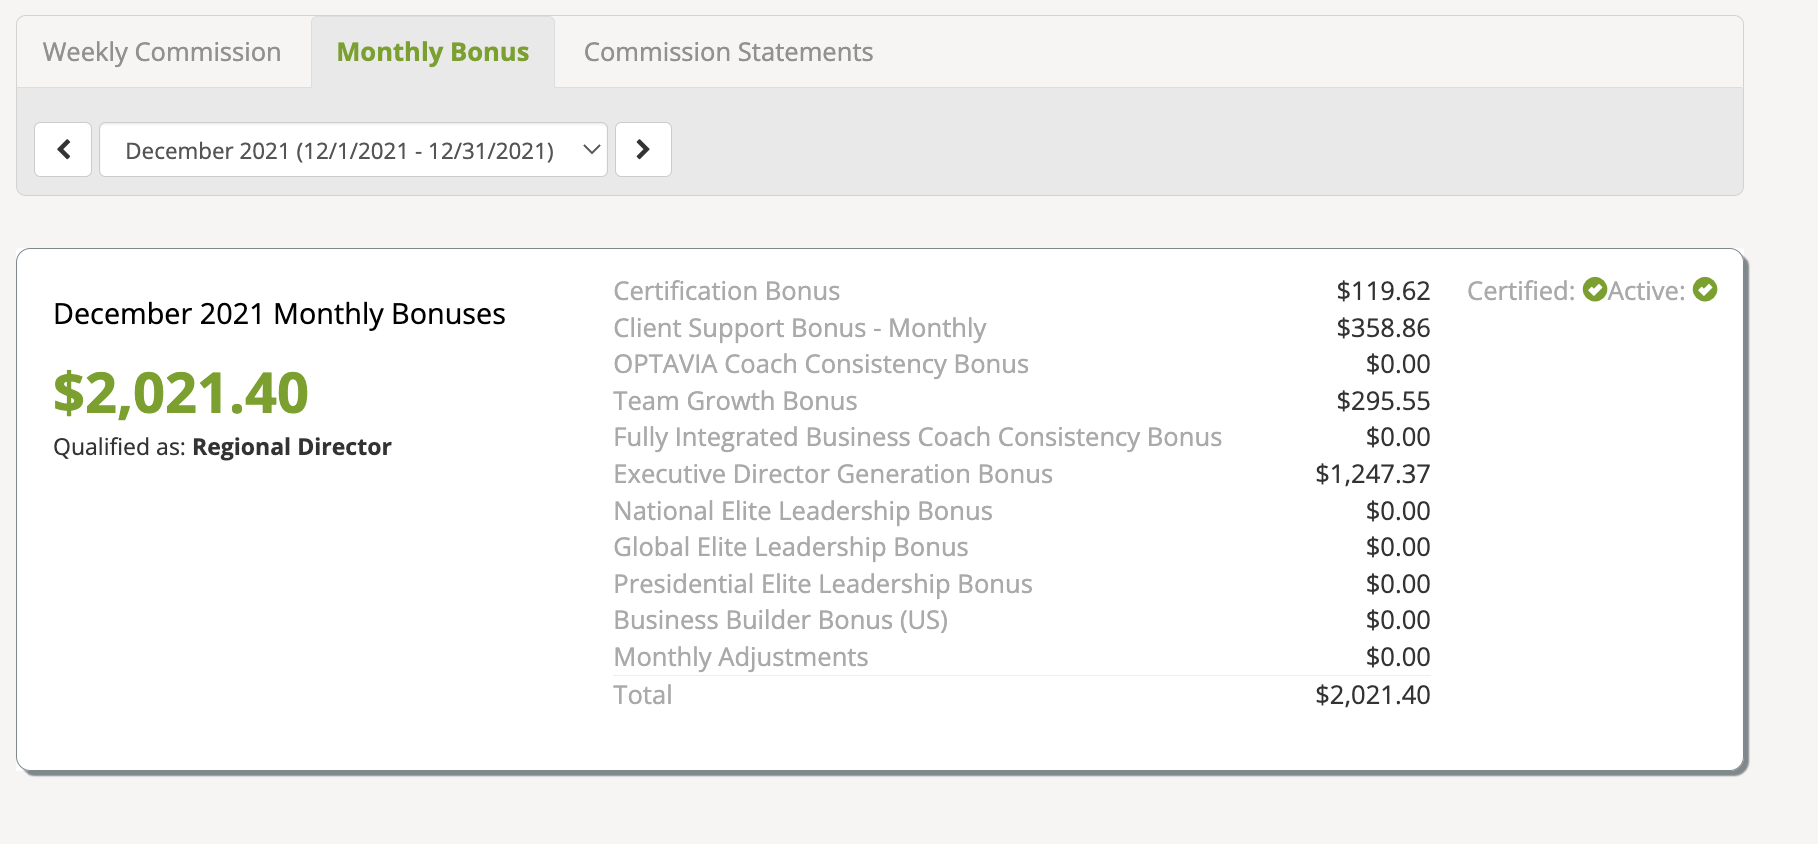 Monthly Bonus - lists all the bonuses the Coach qualifies for and what the earned on each one for that month.